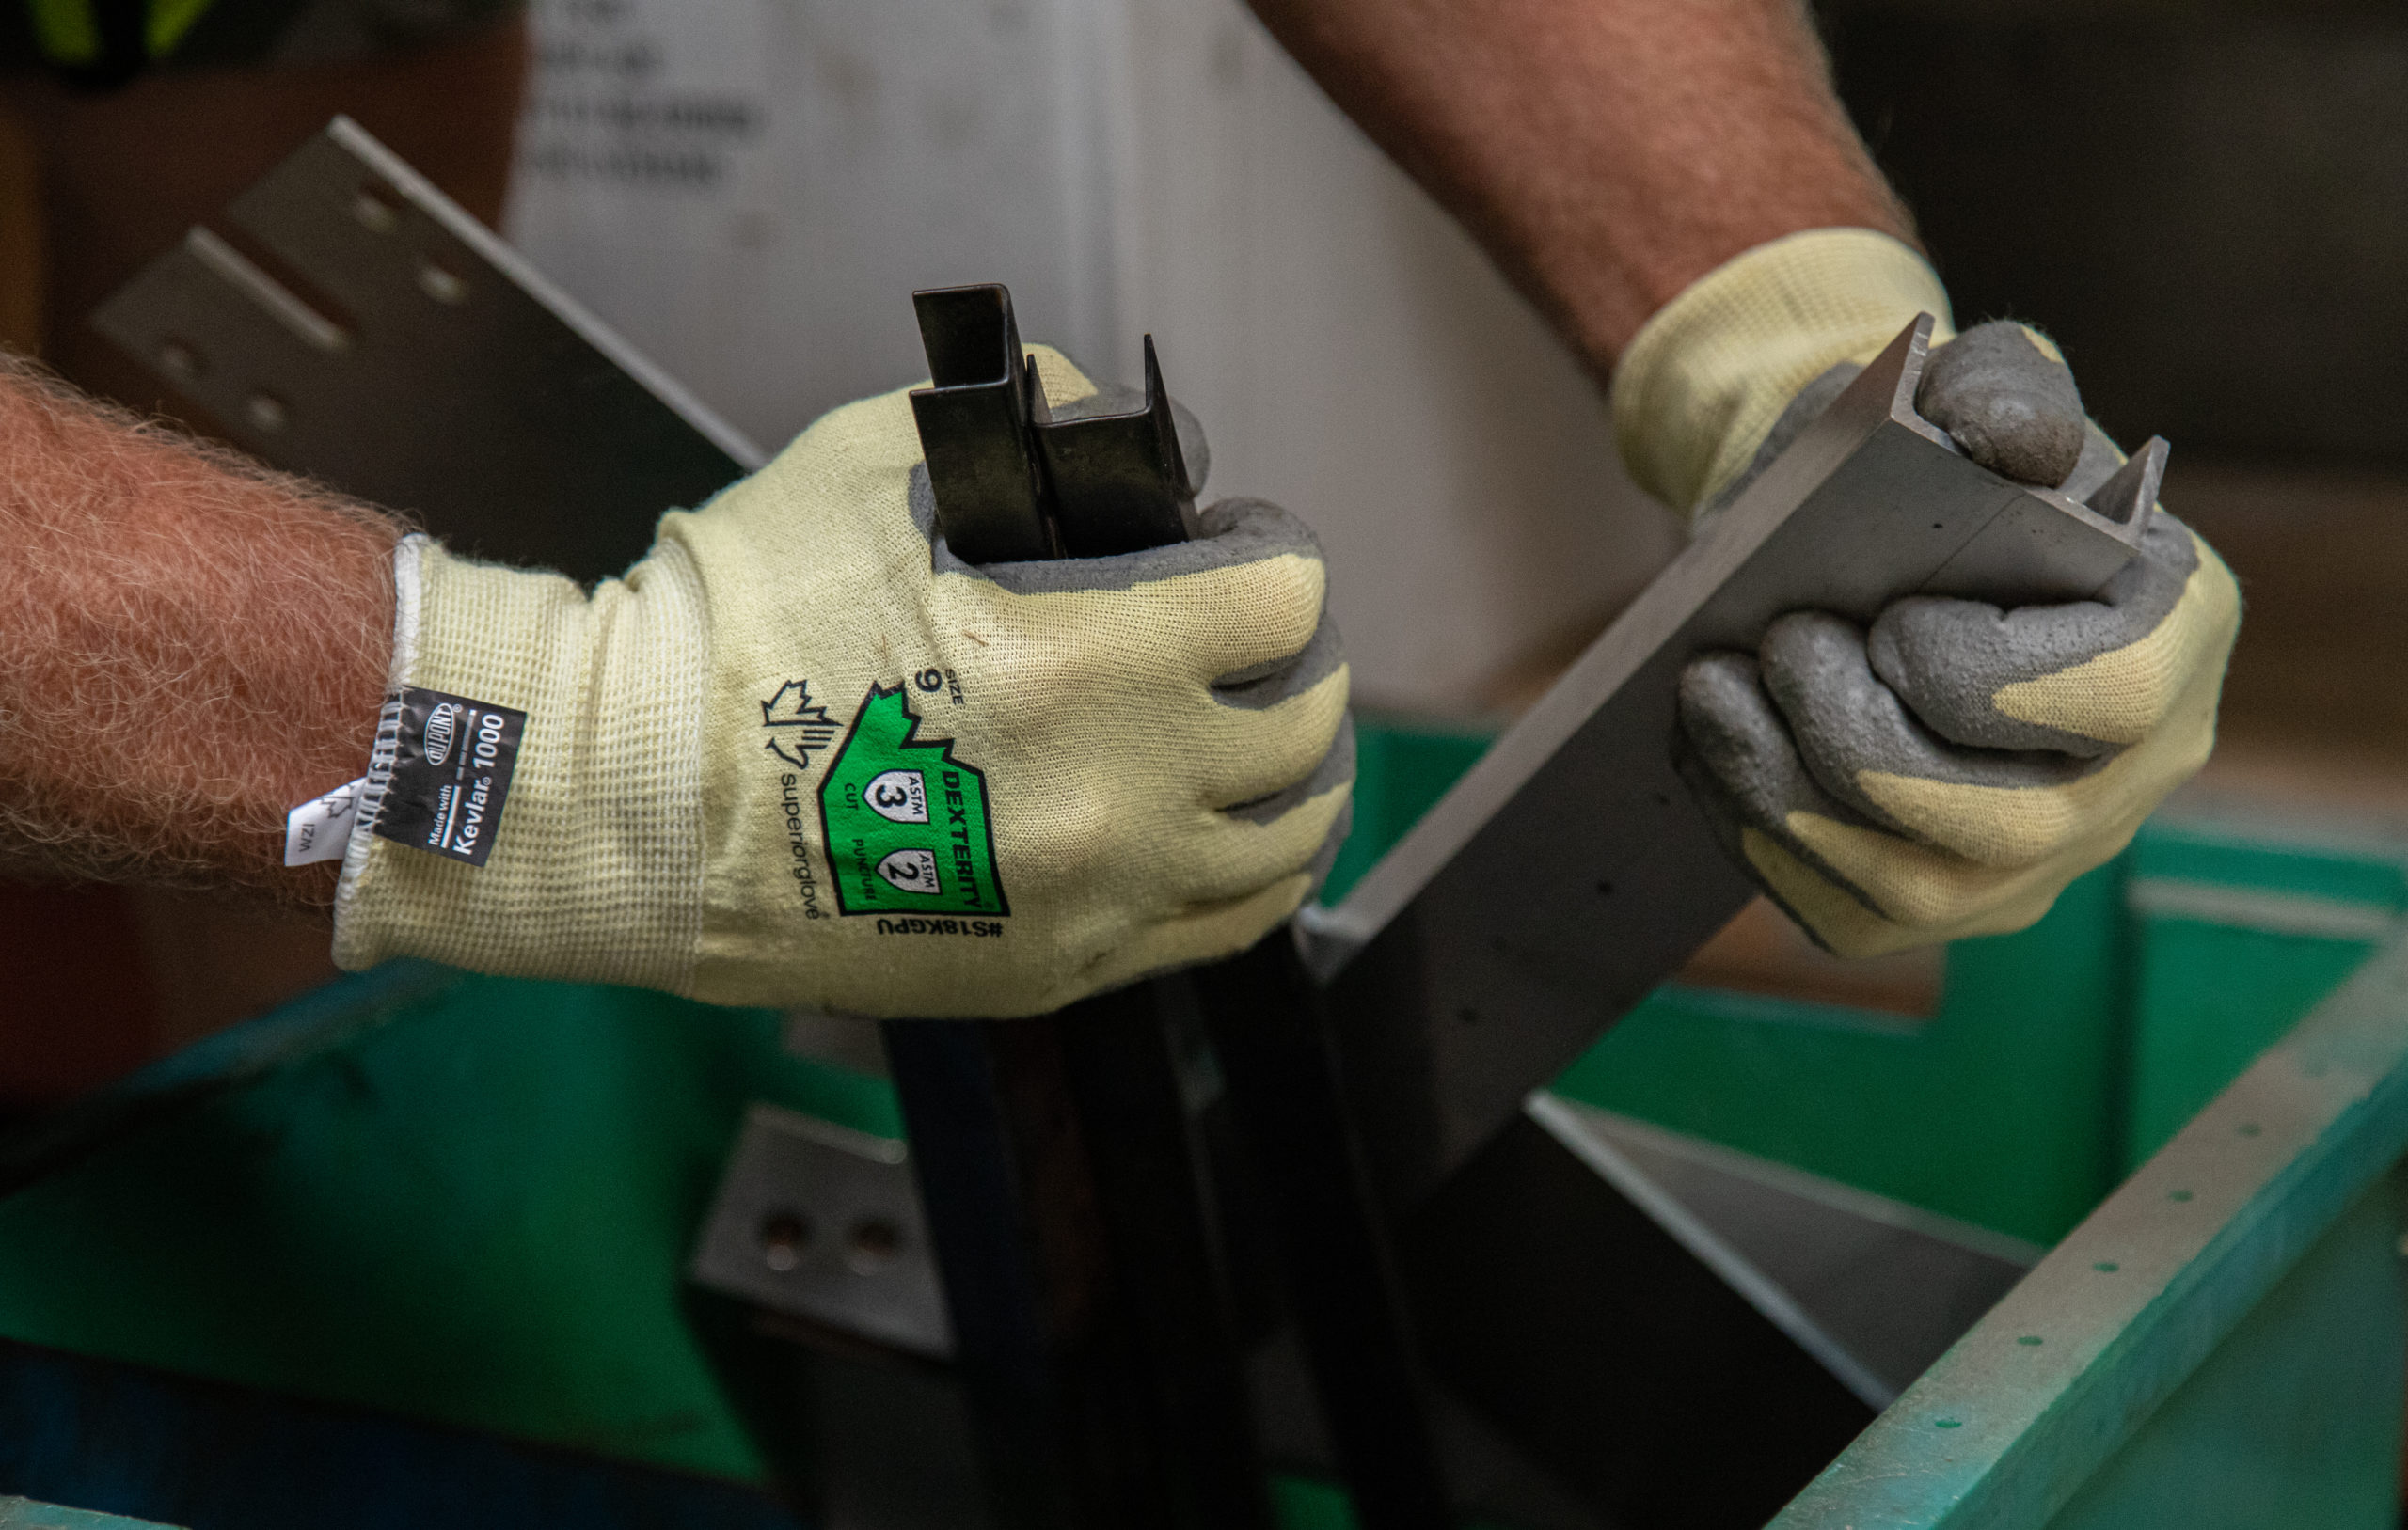 Cut and Puncture Resistant Gloves  Environmental Health & Safety